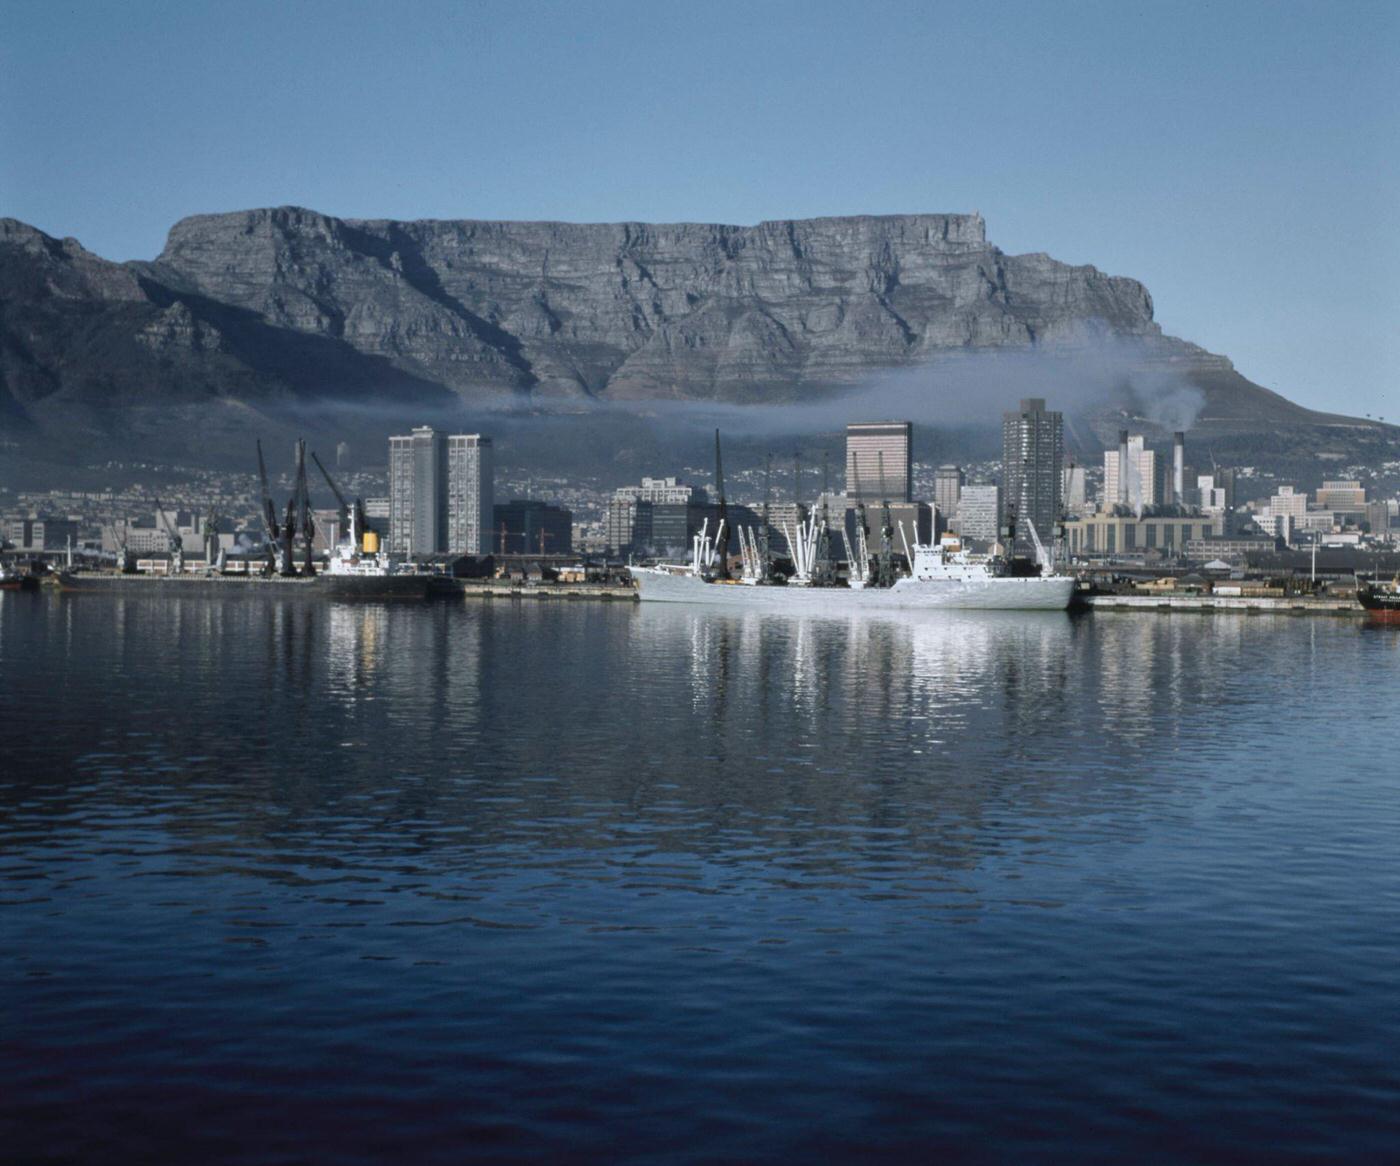 Cargo ships moored in the harbor of the Port of Cape Town below Table Mountain in the city of Cape Town, 1965